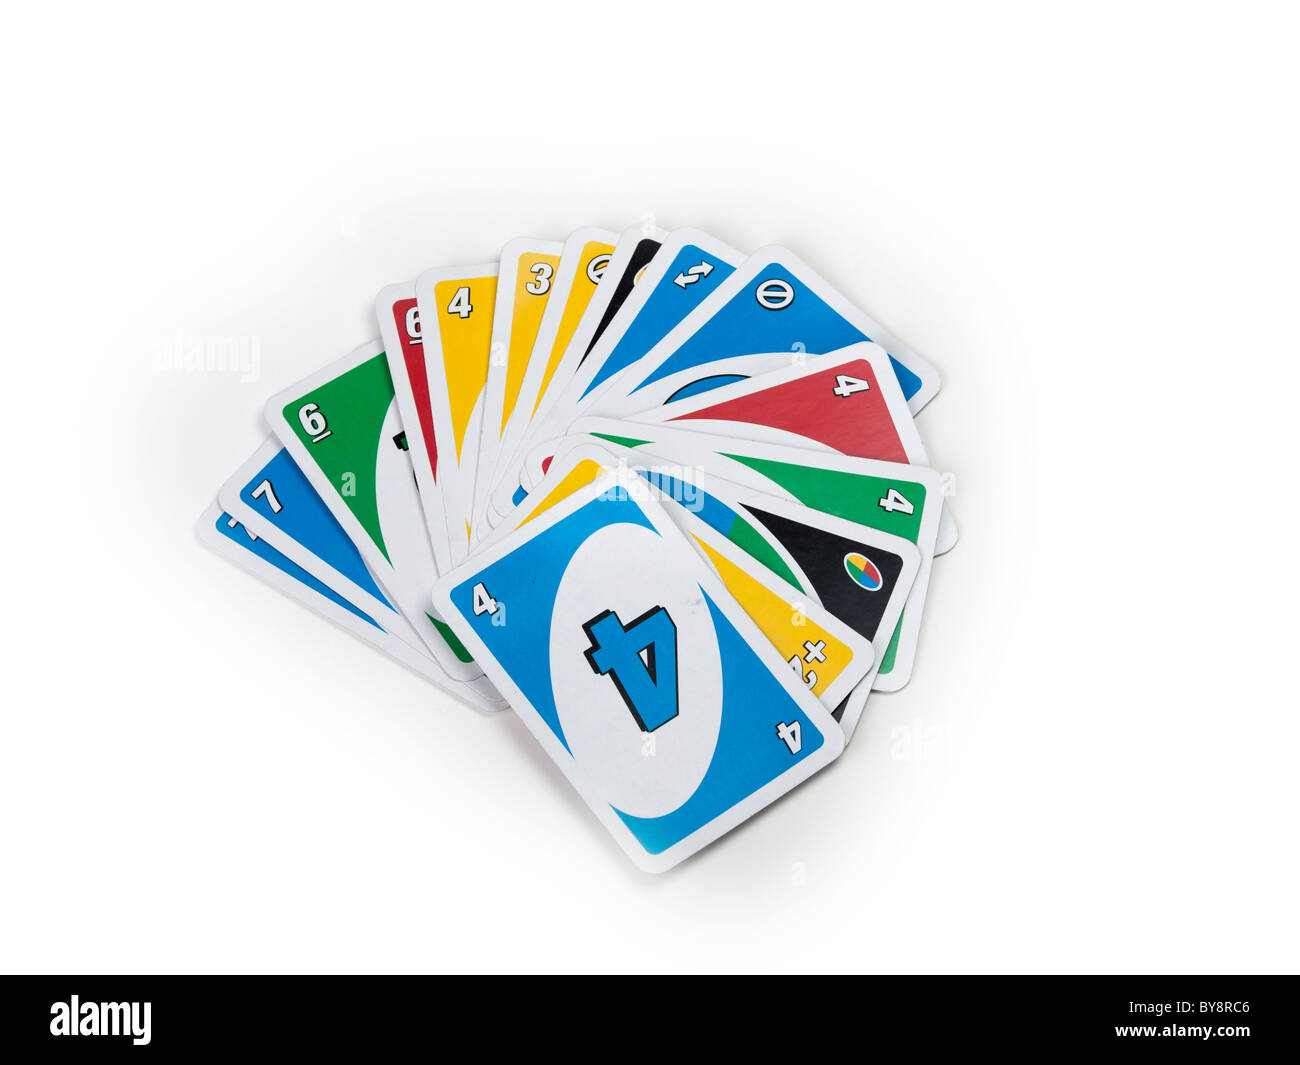 Uno playing cards spread on a white background Stock Photo